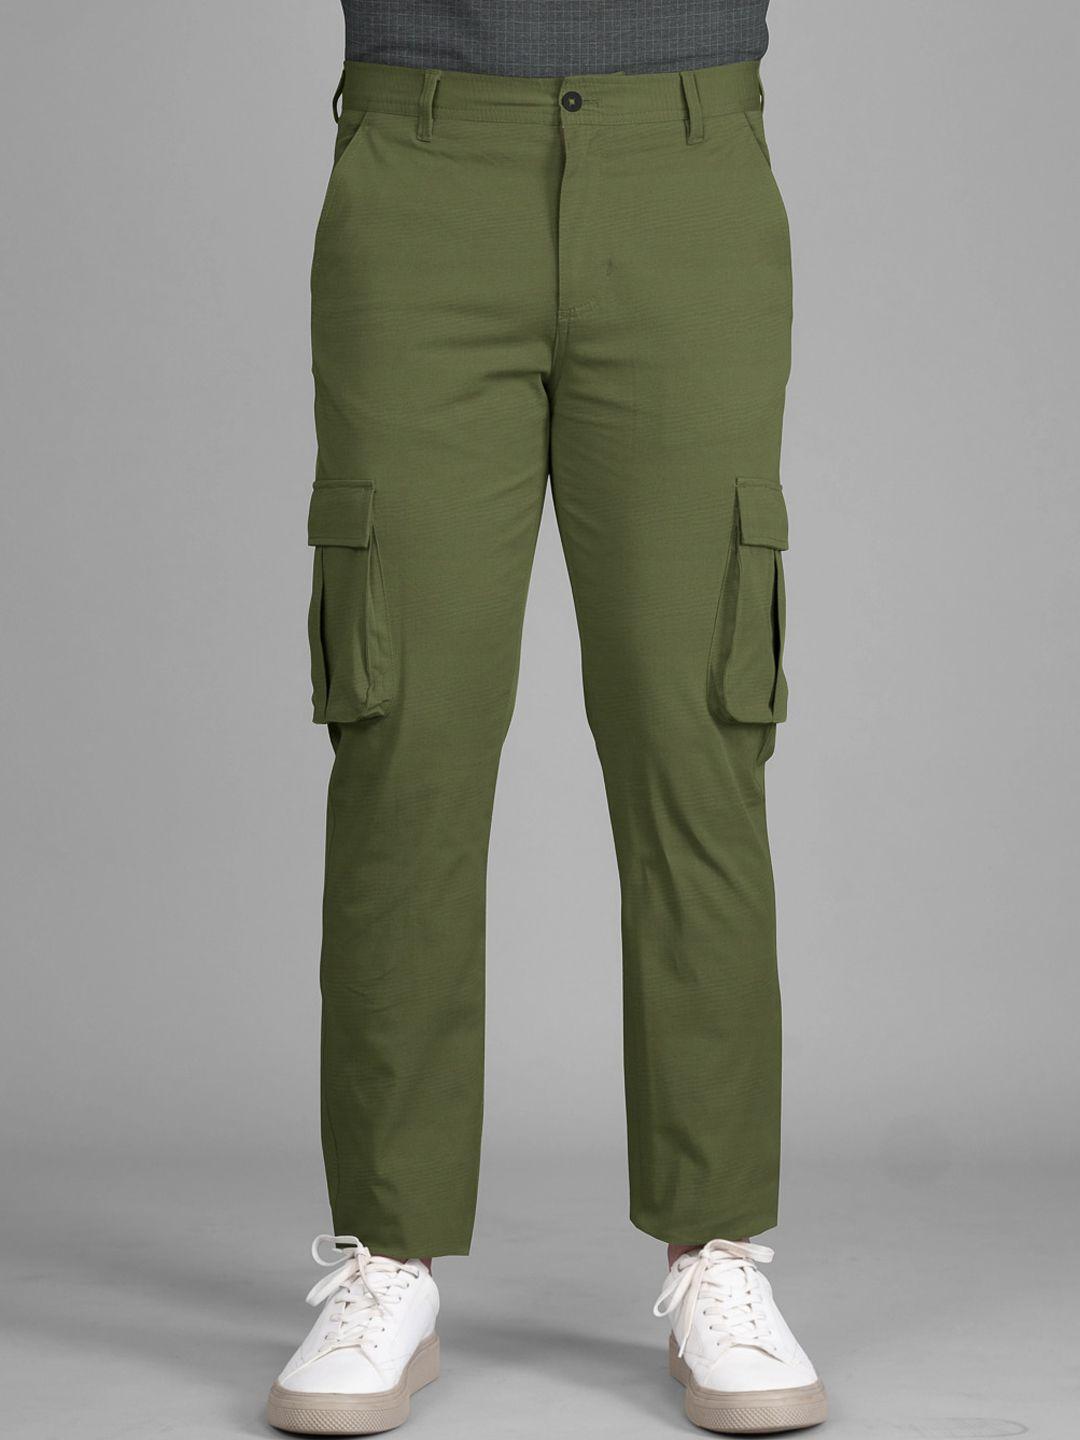 the pant project men cotton tailored slim fit cargos trousers